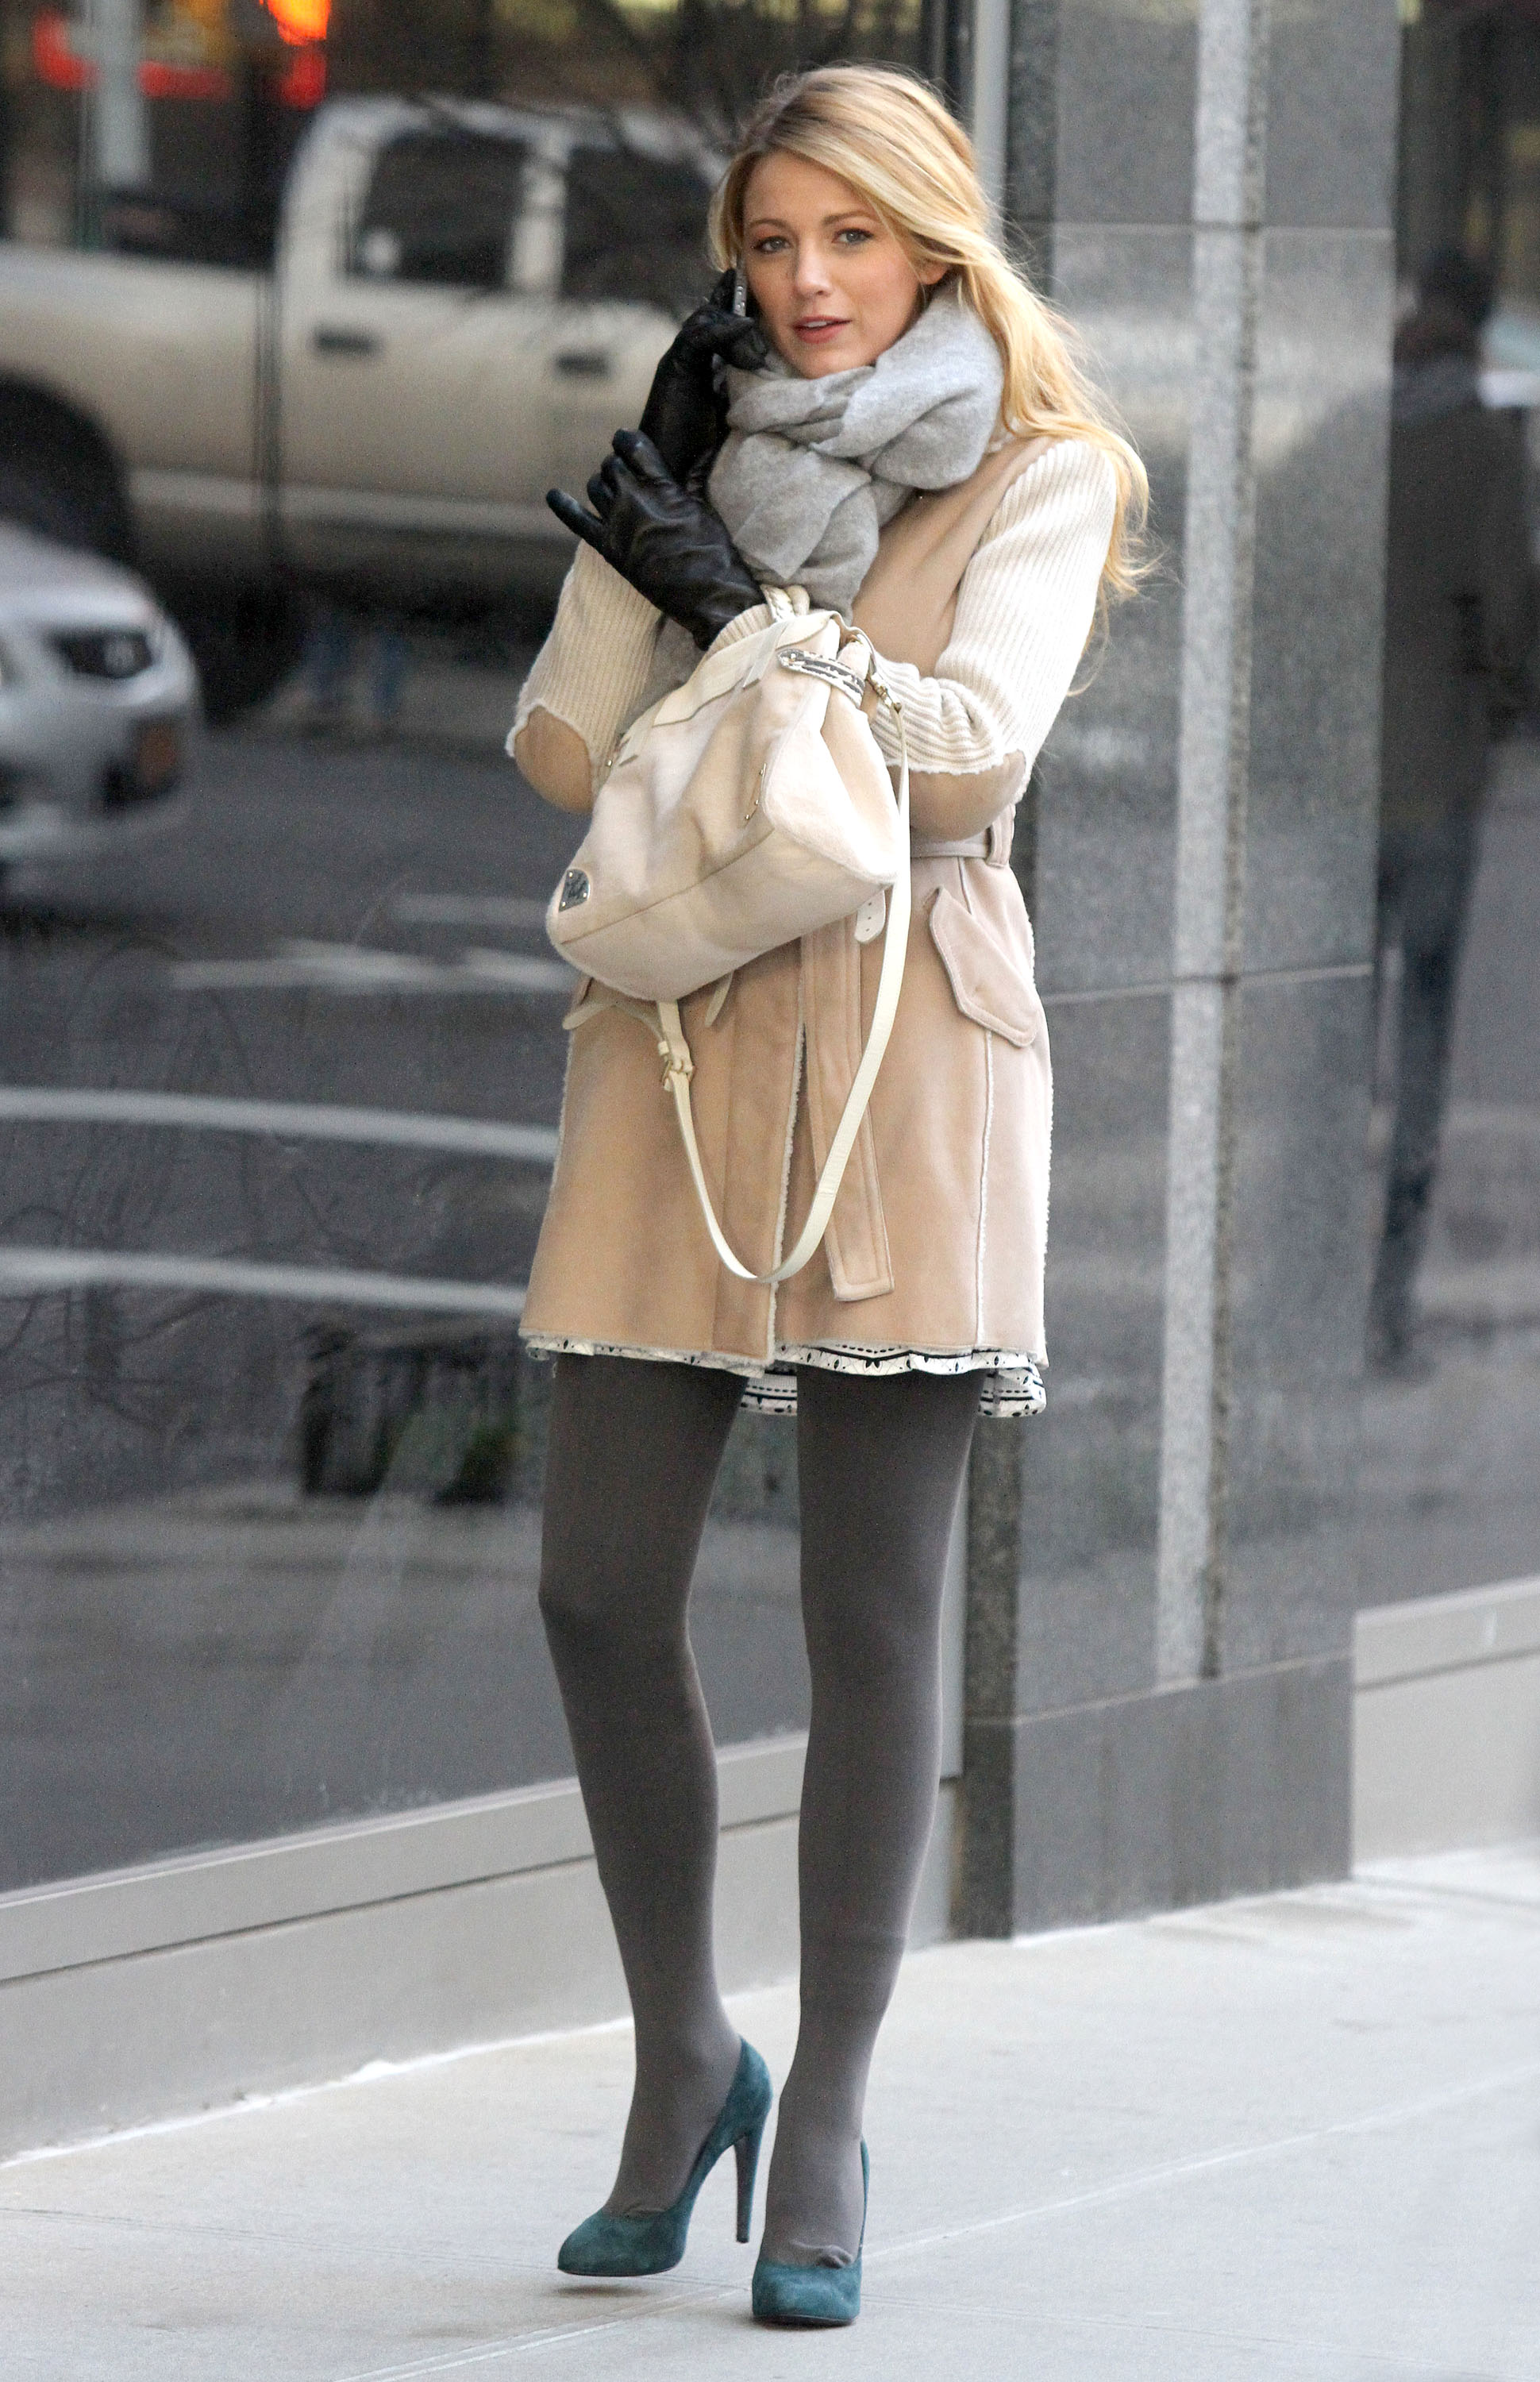 8391809 Actress Blake Lively films a scene on the set of "Gossip Girl" on January 09, 2012 in New York City, NY. The actress kept warm in a Fay coat while filming on a cold New York day. FameFlynet, Inc. - Santa Monica, CA, USA - +1 (818) 307-4813